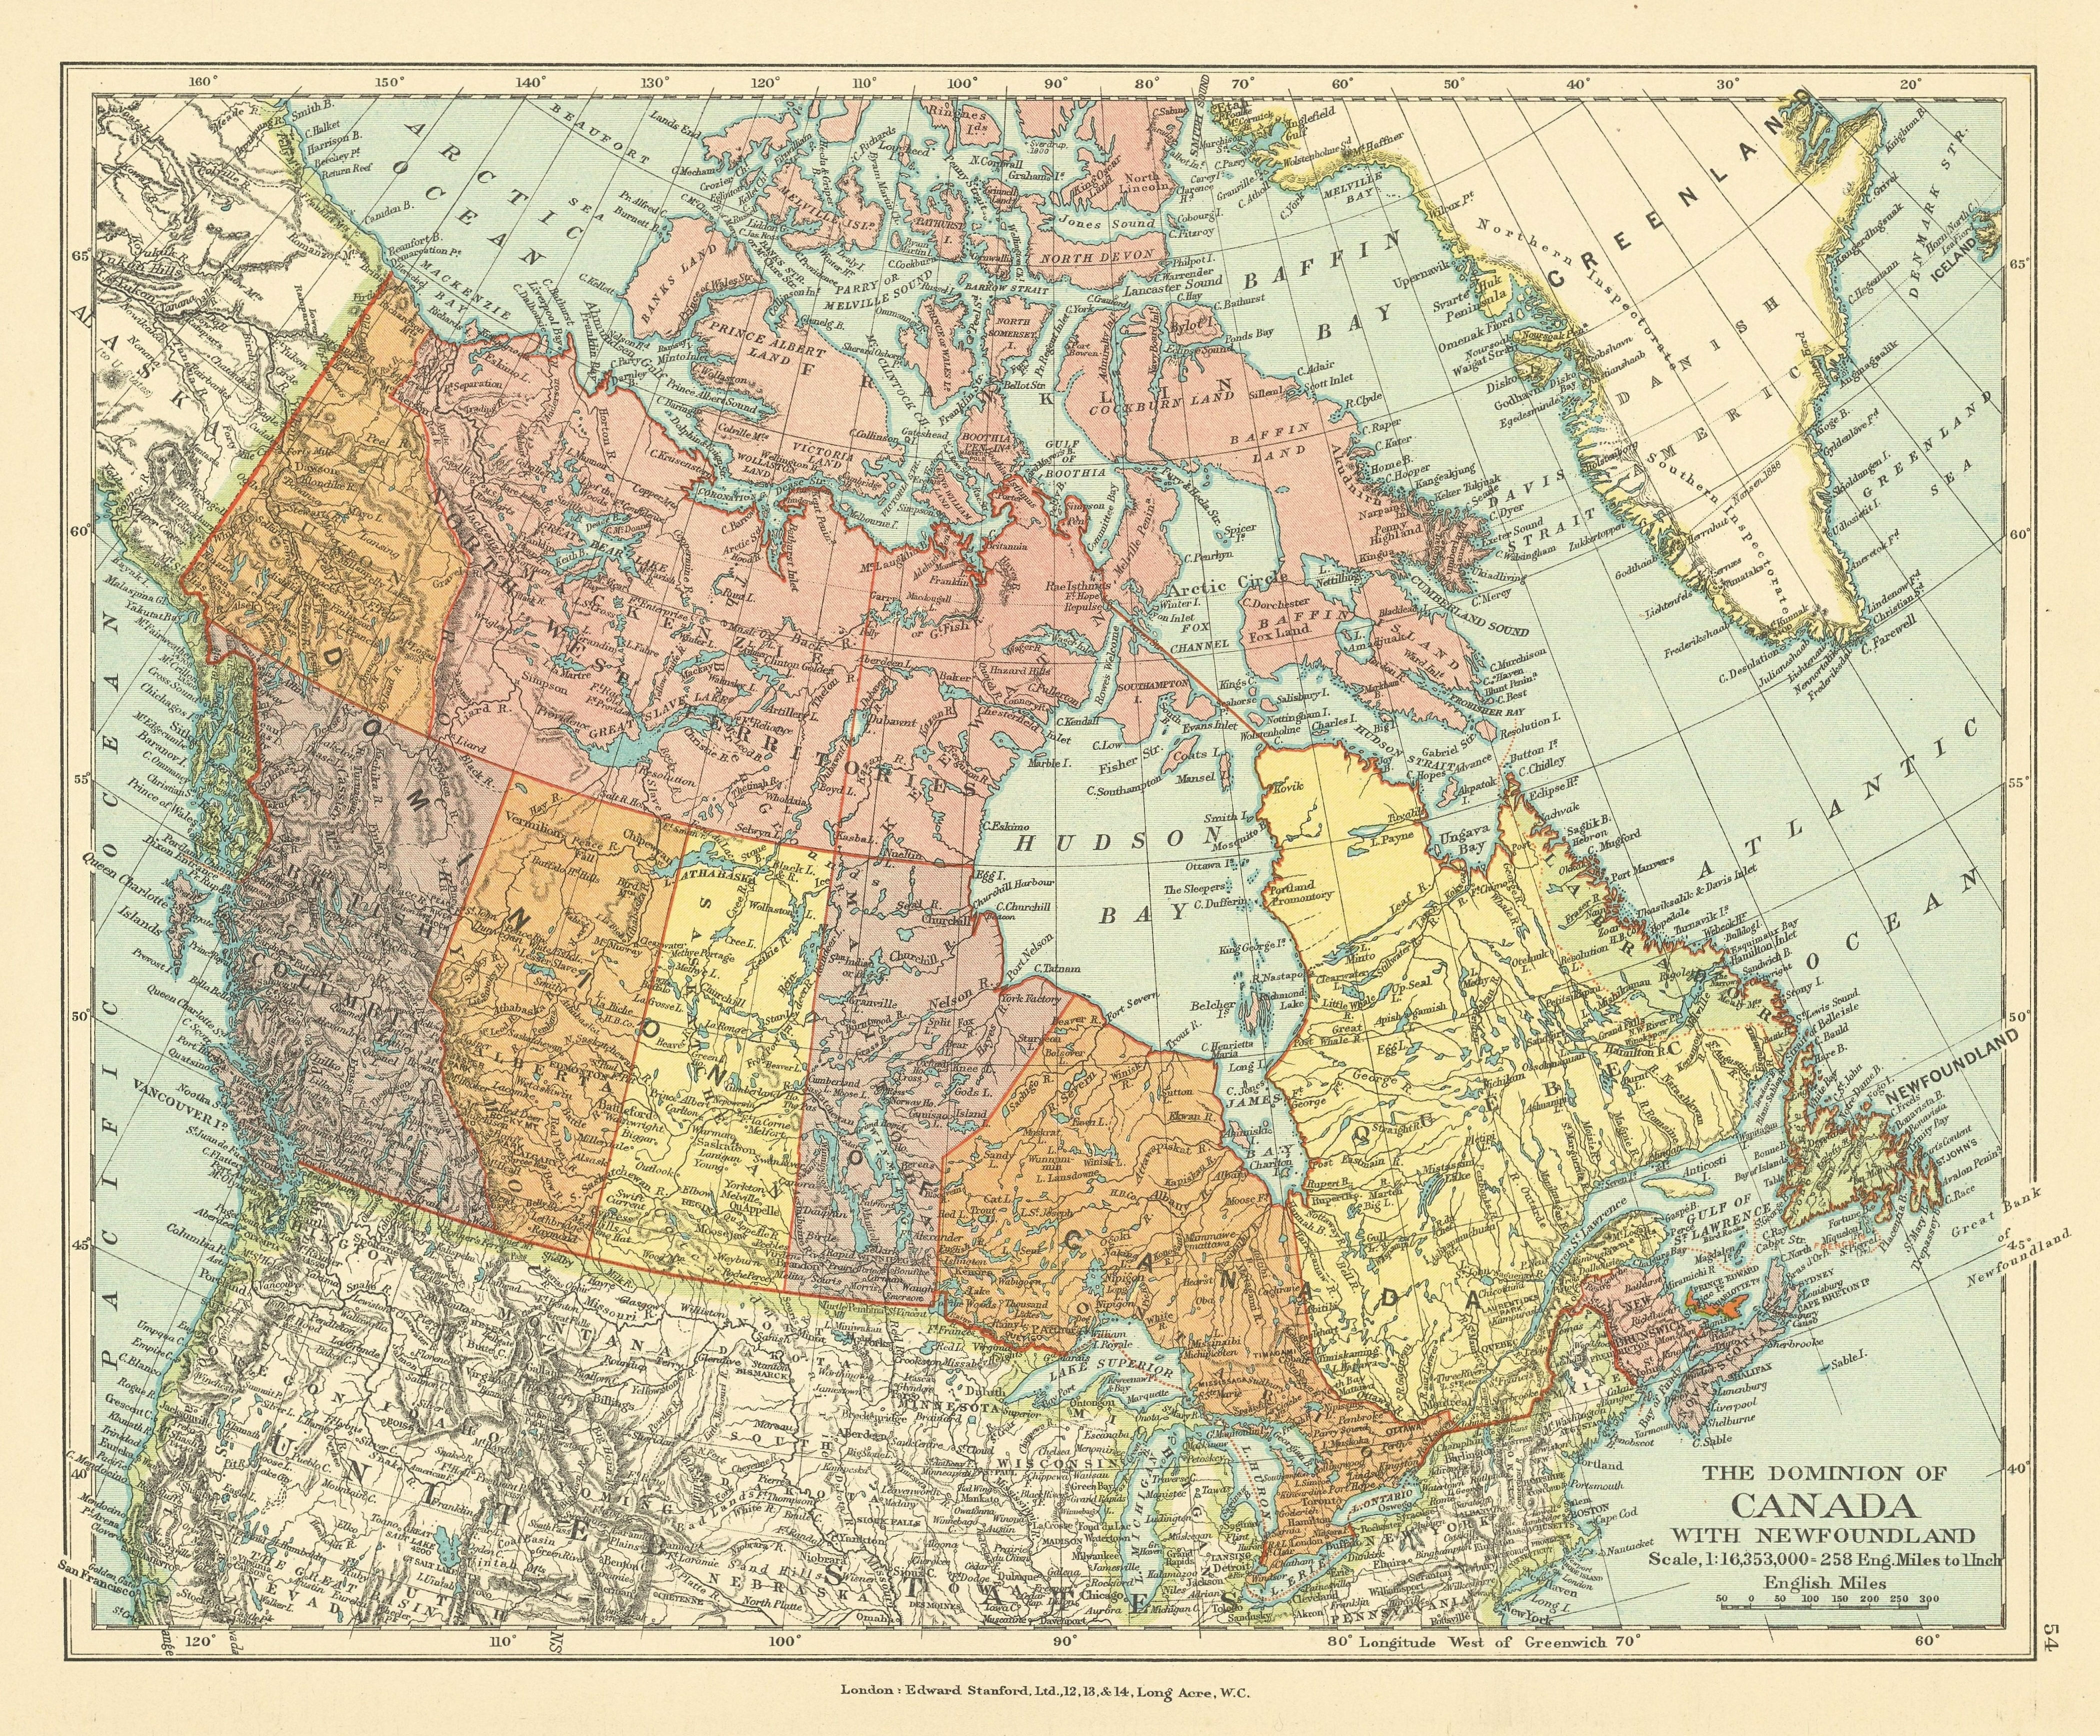 Associate Product The Dominion of Canada with Newfoundland. STANFORD c1925 old vintage map chart